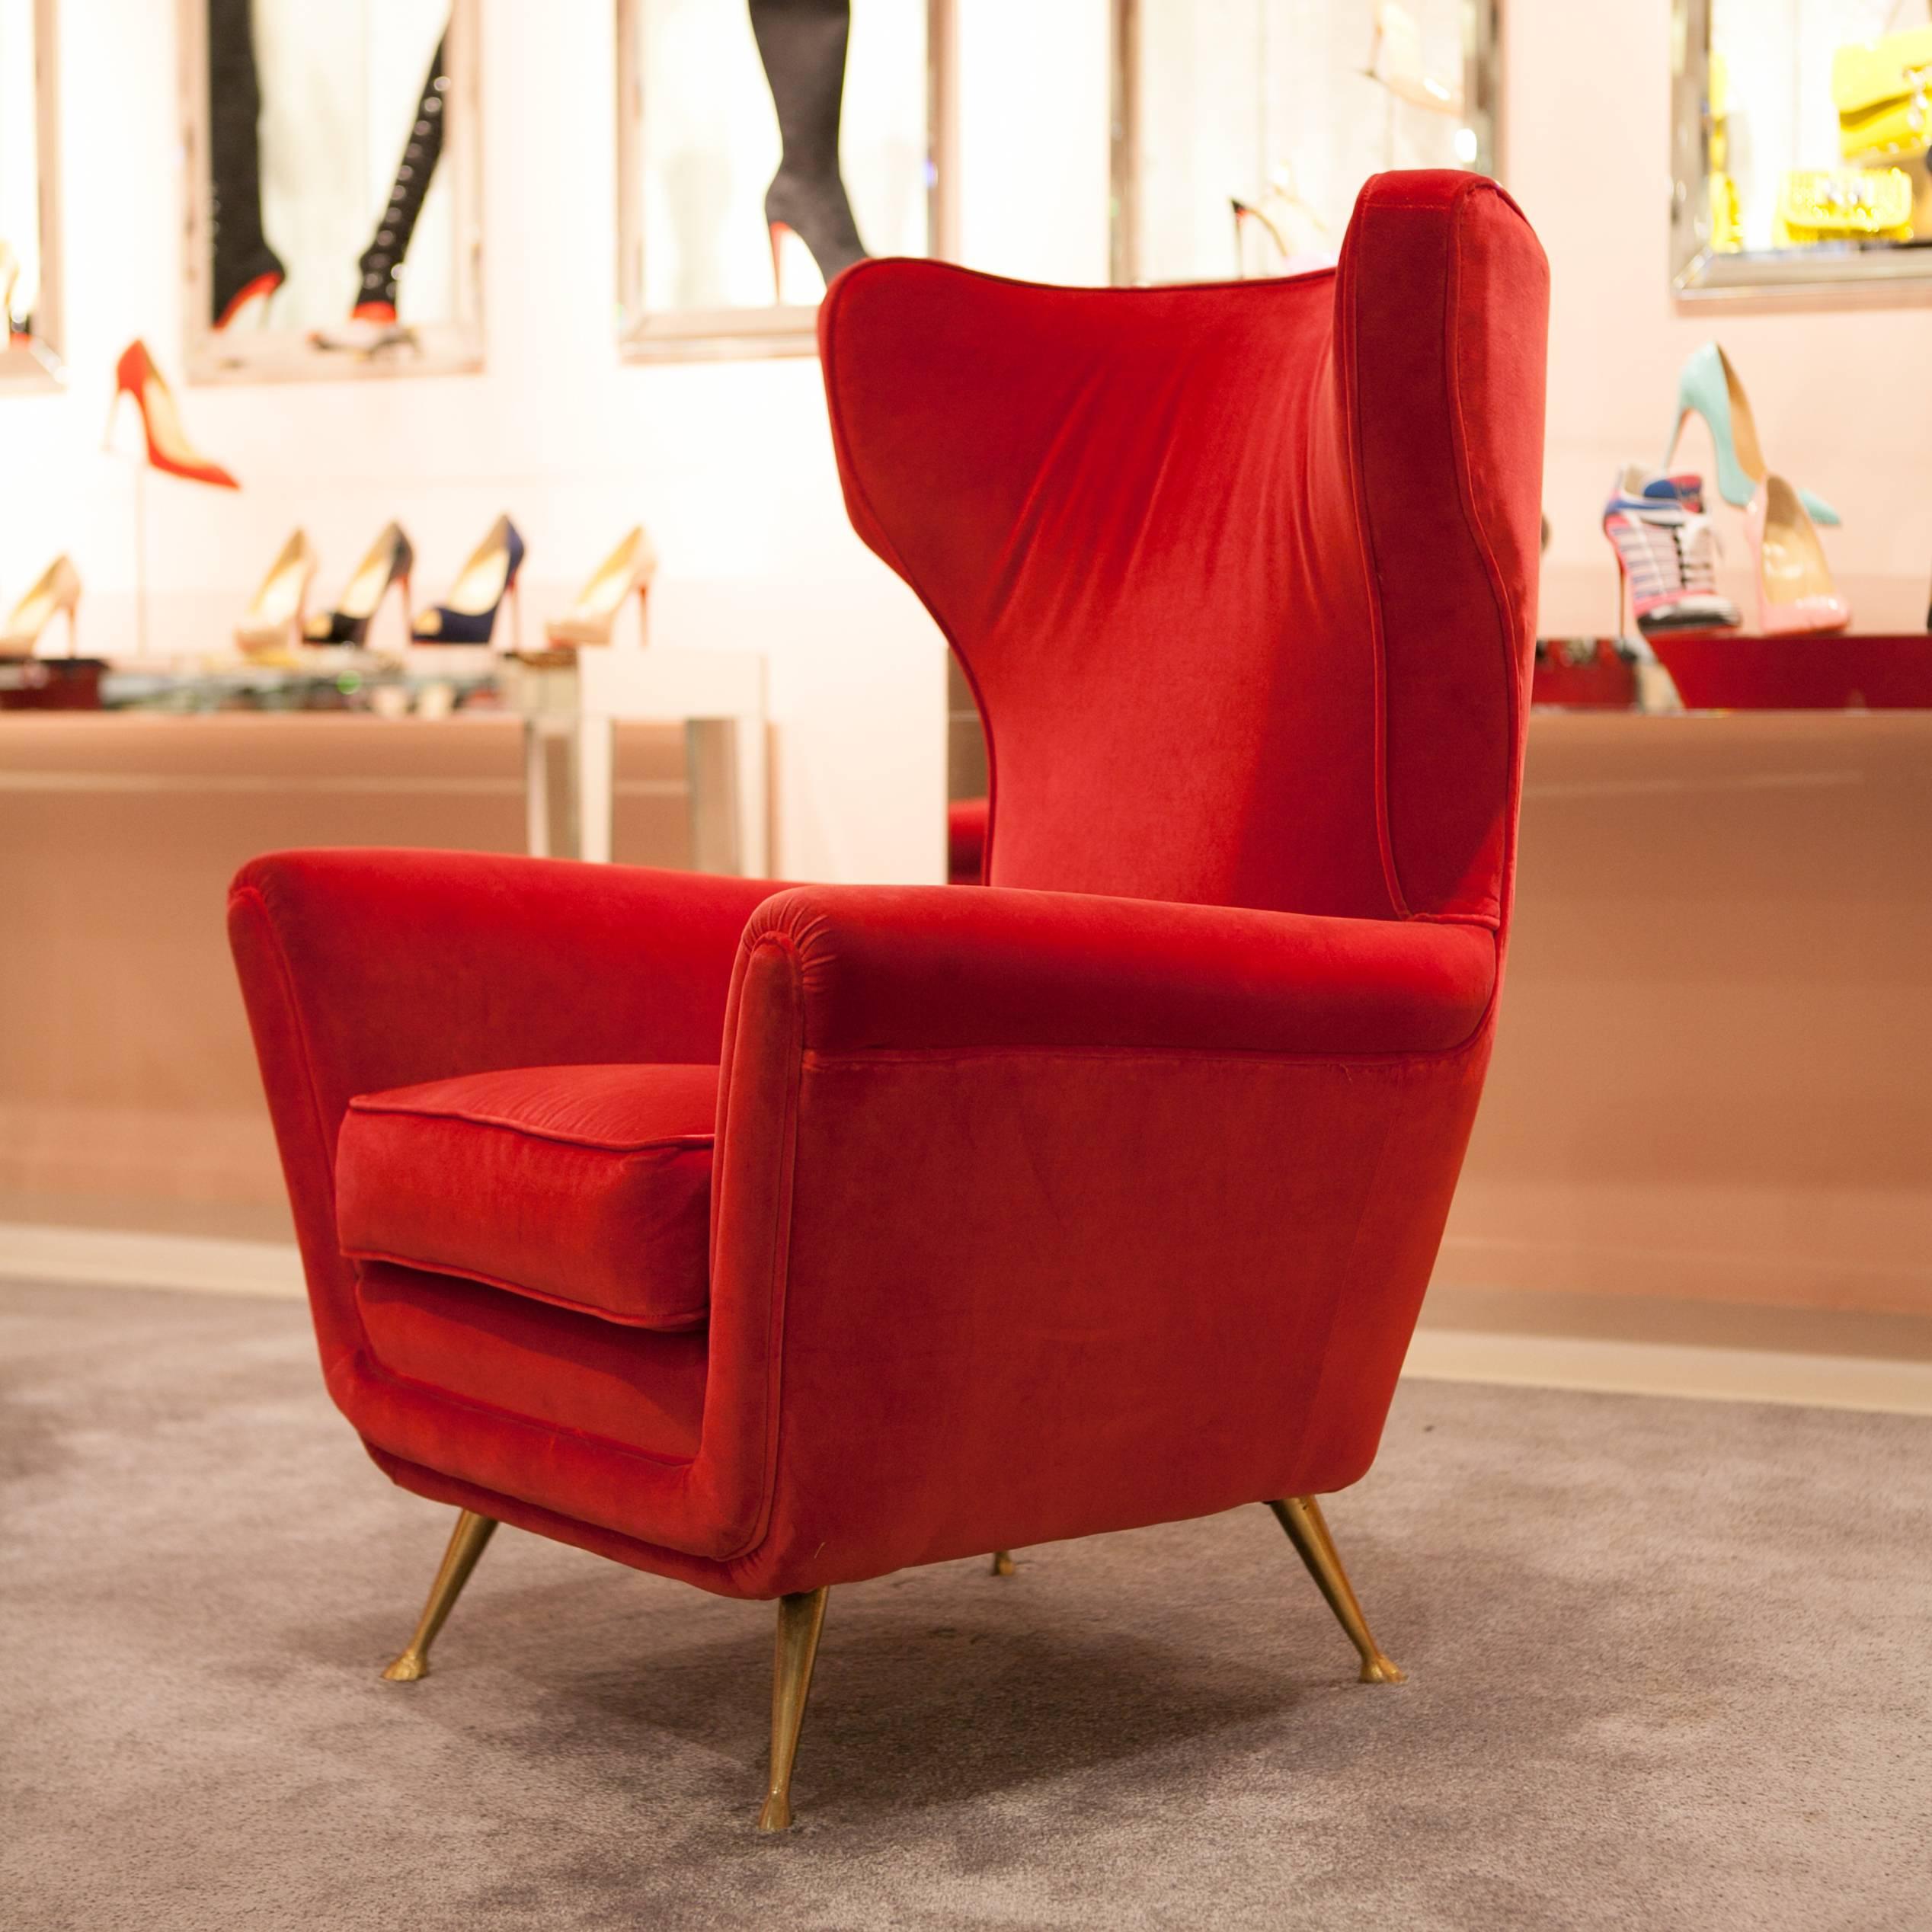 Got a crush on red? Then these lipstick red lounge chairs are exactly what you need.
Give your home a colorful boost with this set made of luxurious velvet. Tiny golden legs add the final touch to the elegant appearance.
So, take a seat and revive